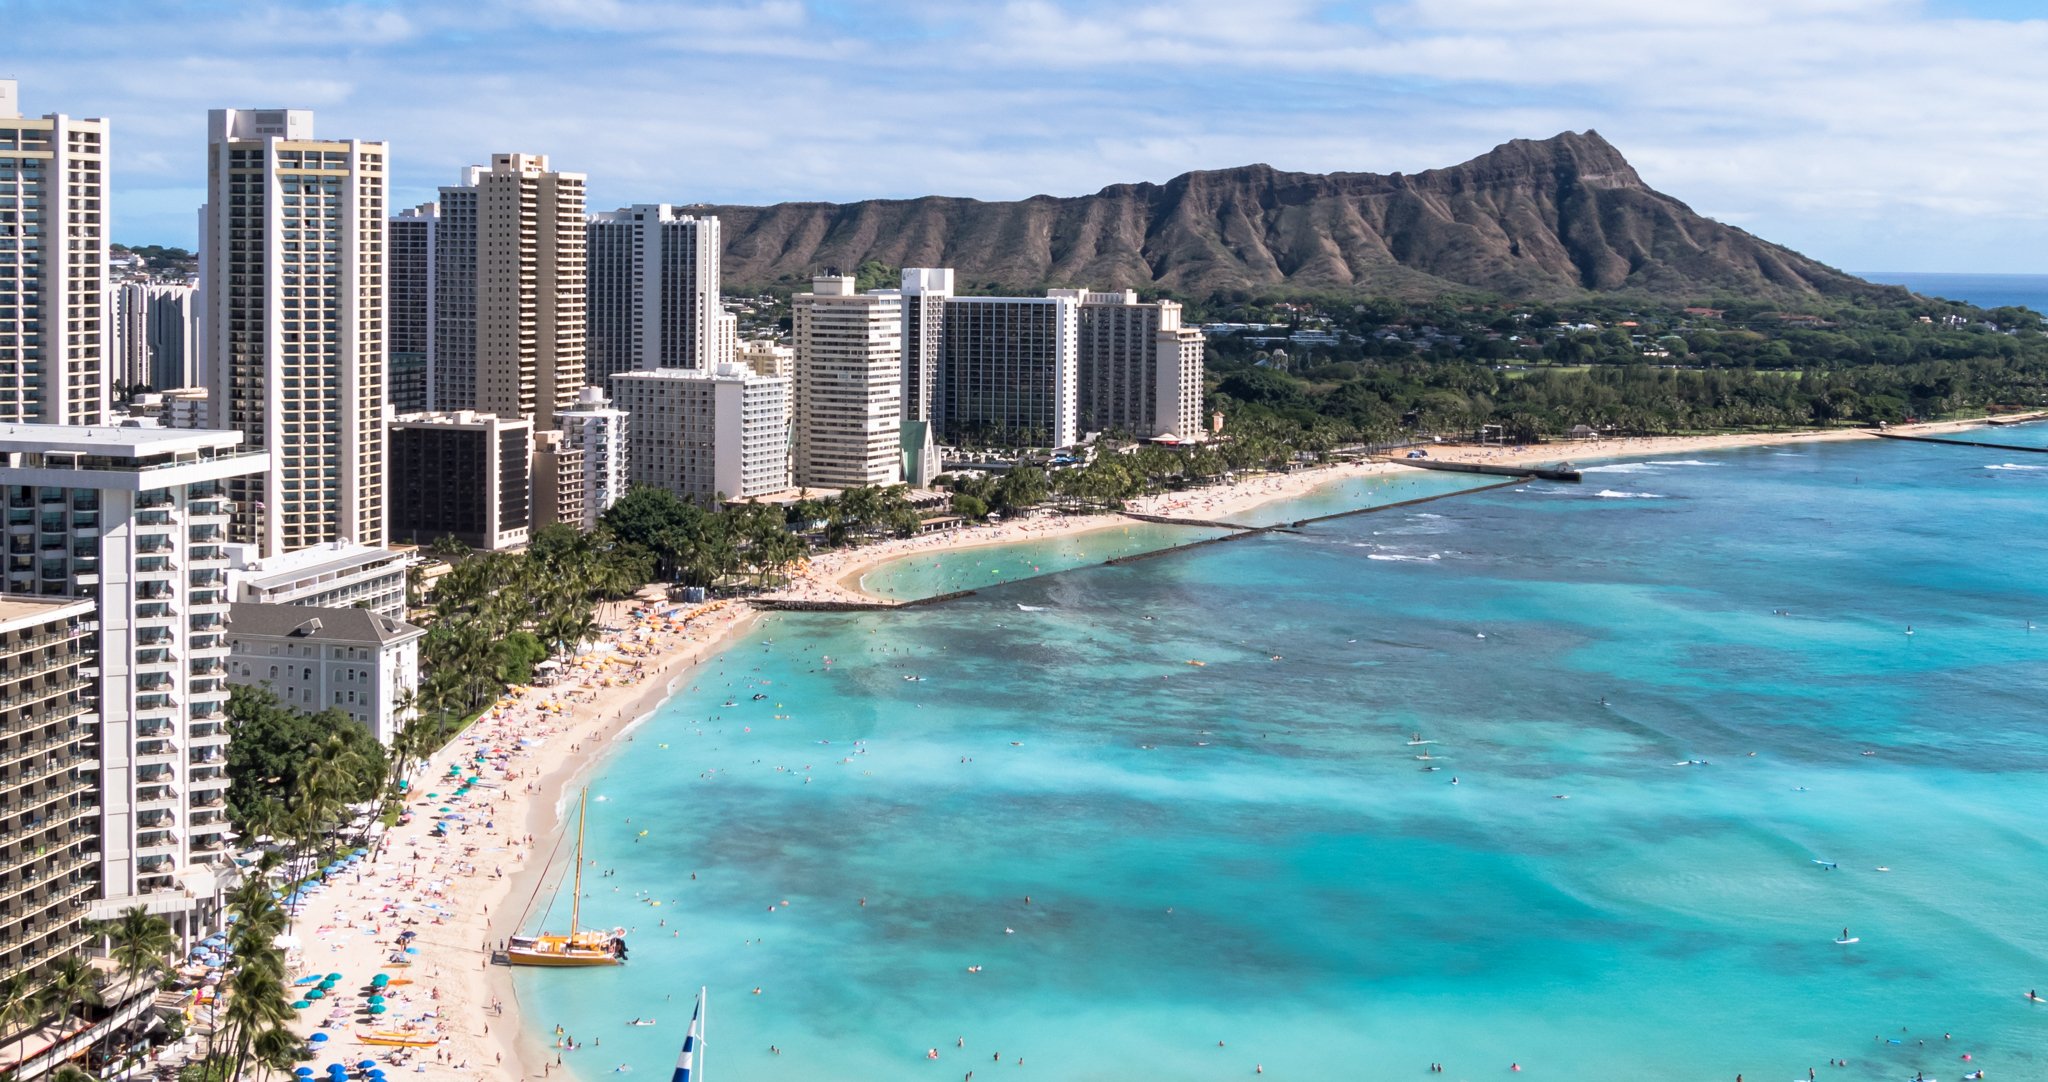 10 Best Things to Do in North Shore, Oʻahu - Prince Waikiki